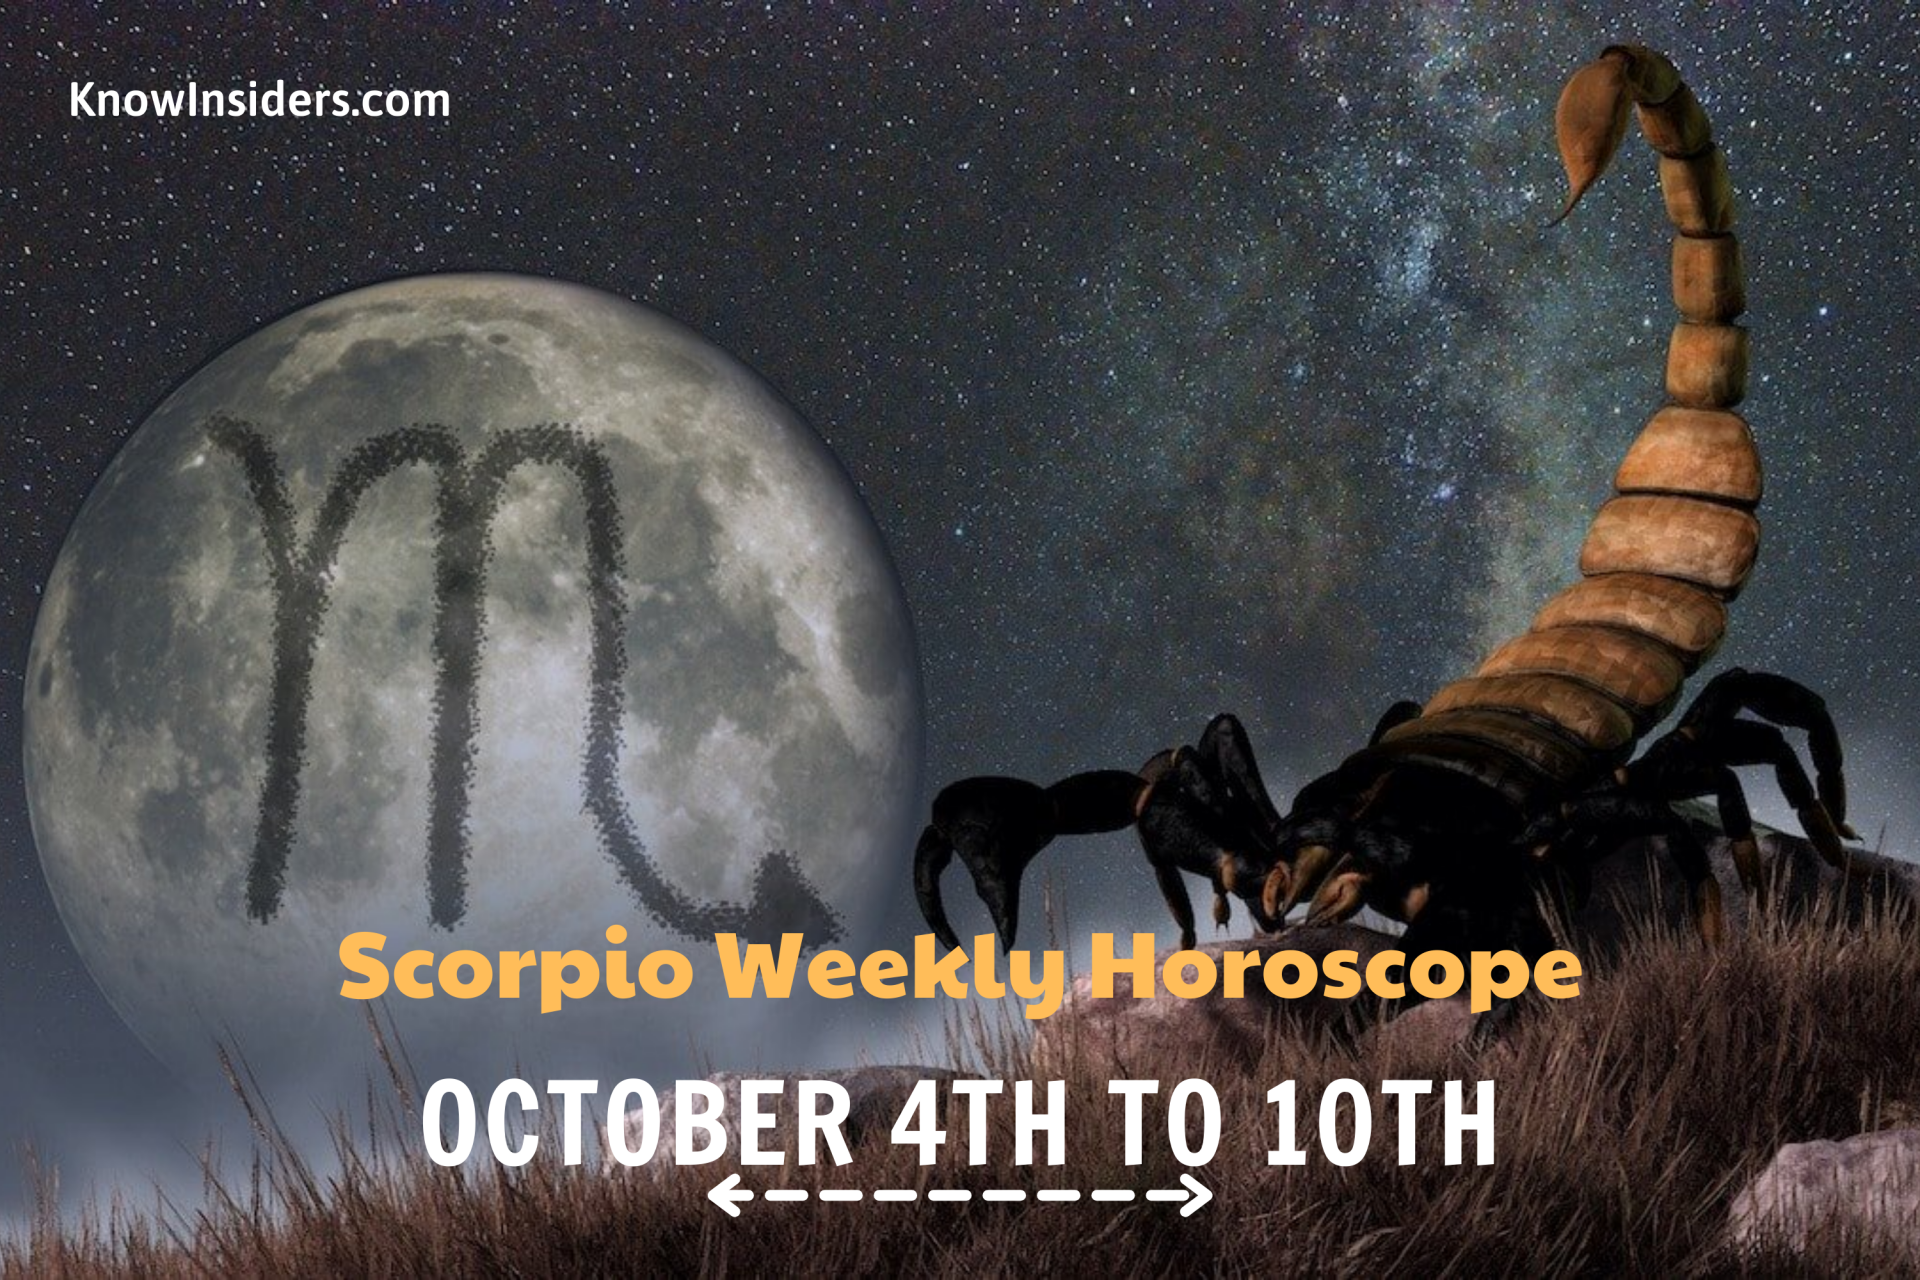 SCORPIO Weekly Horoscope 4 to 10 October 2021: Prediction for Love, Money, Career and Health